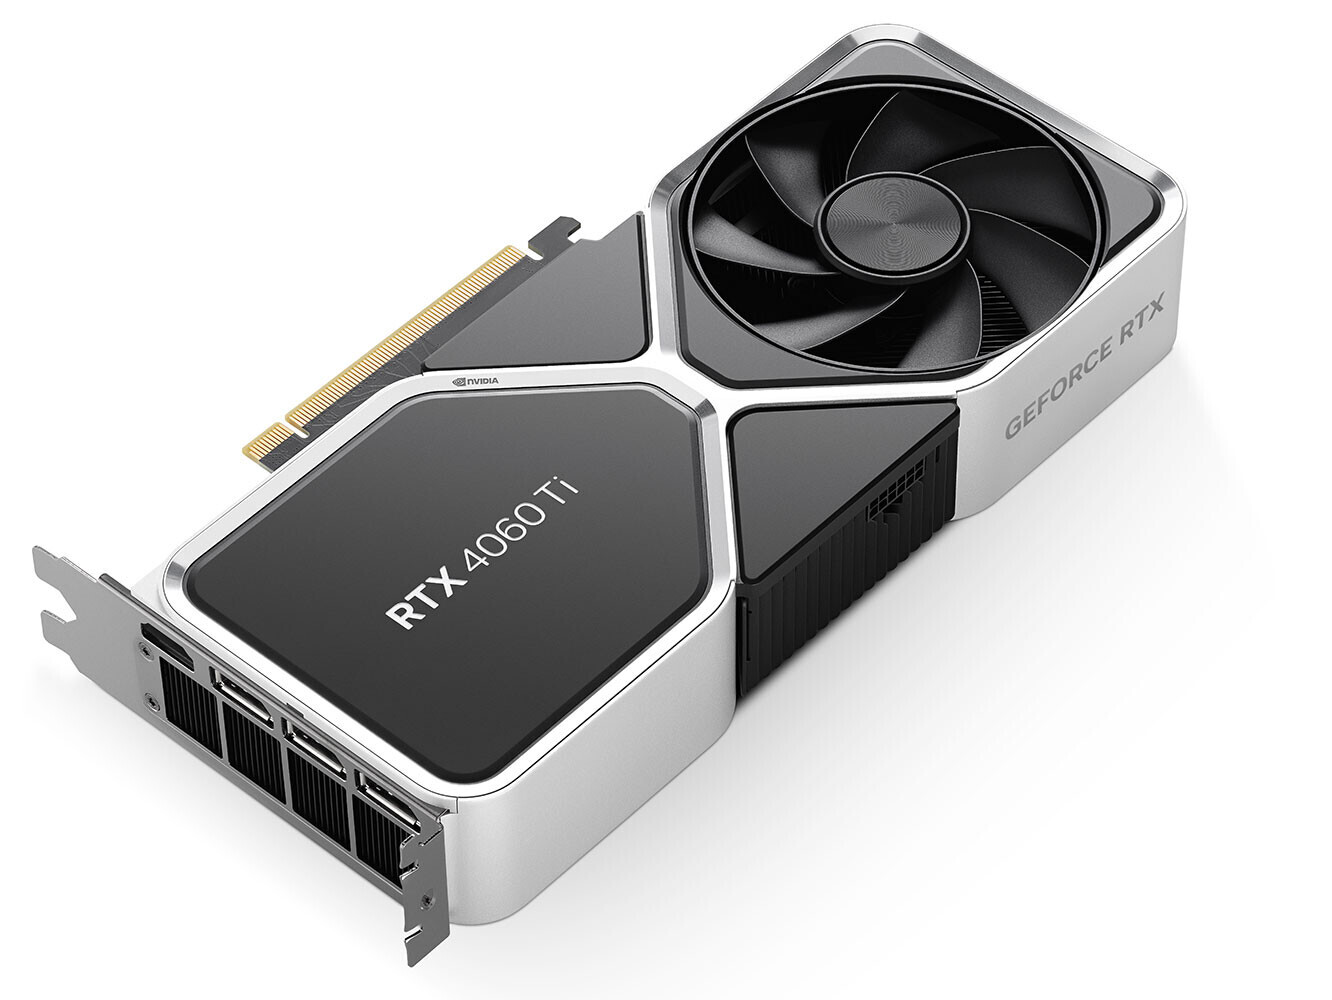 Gigabyte Confirms Existence Of NVIDIA GeForce RTX 4070, RTX 4060 